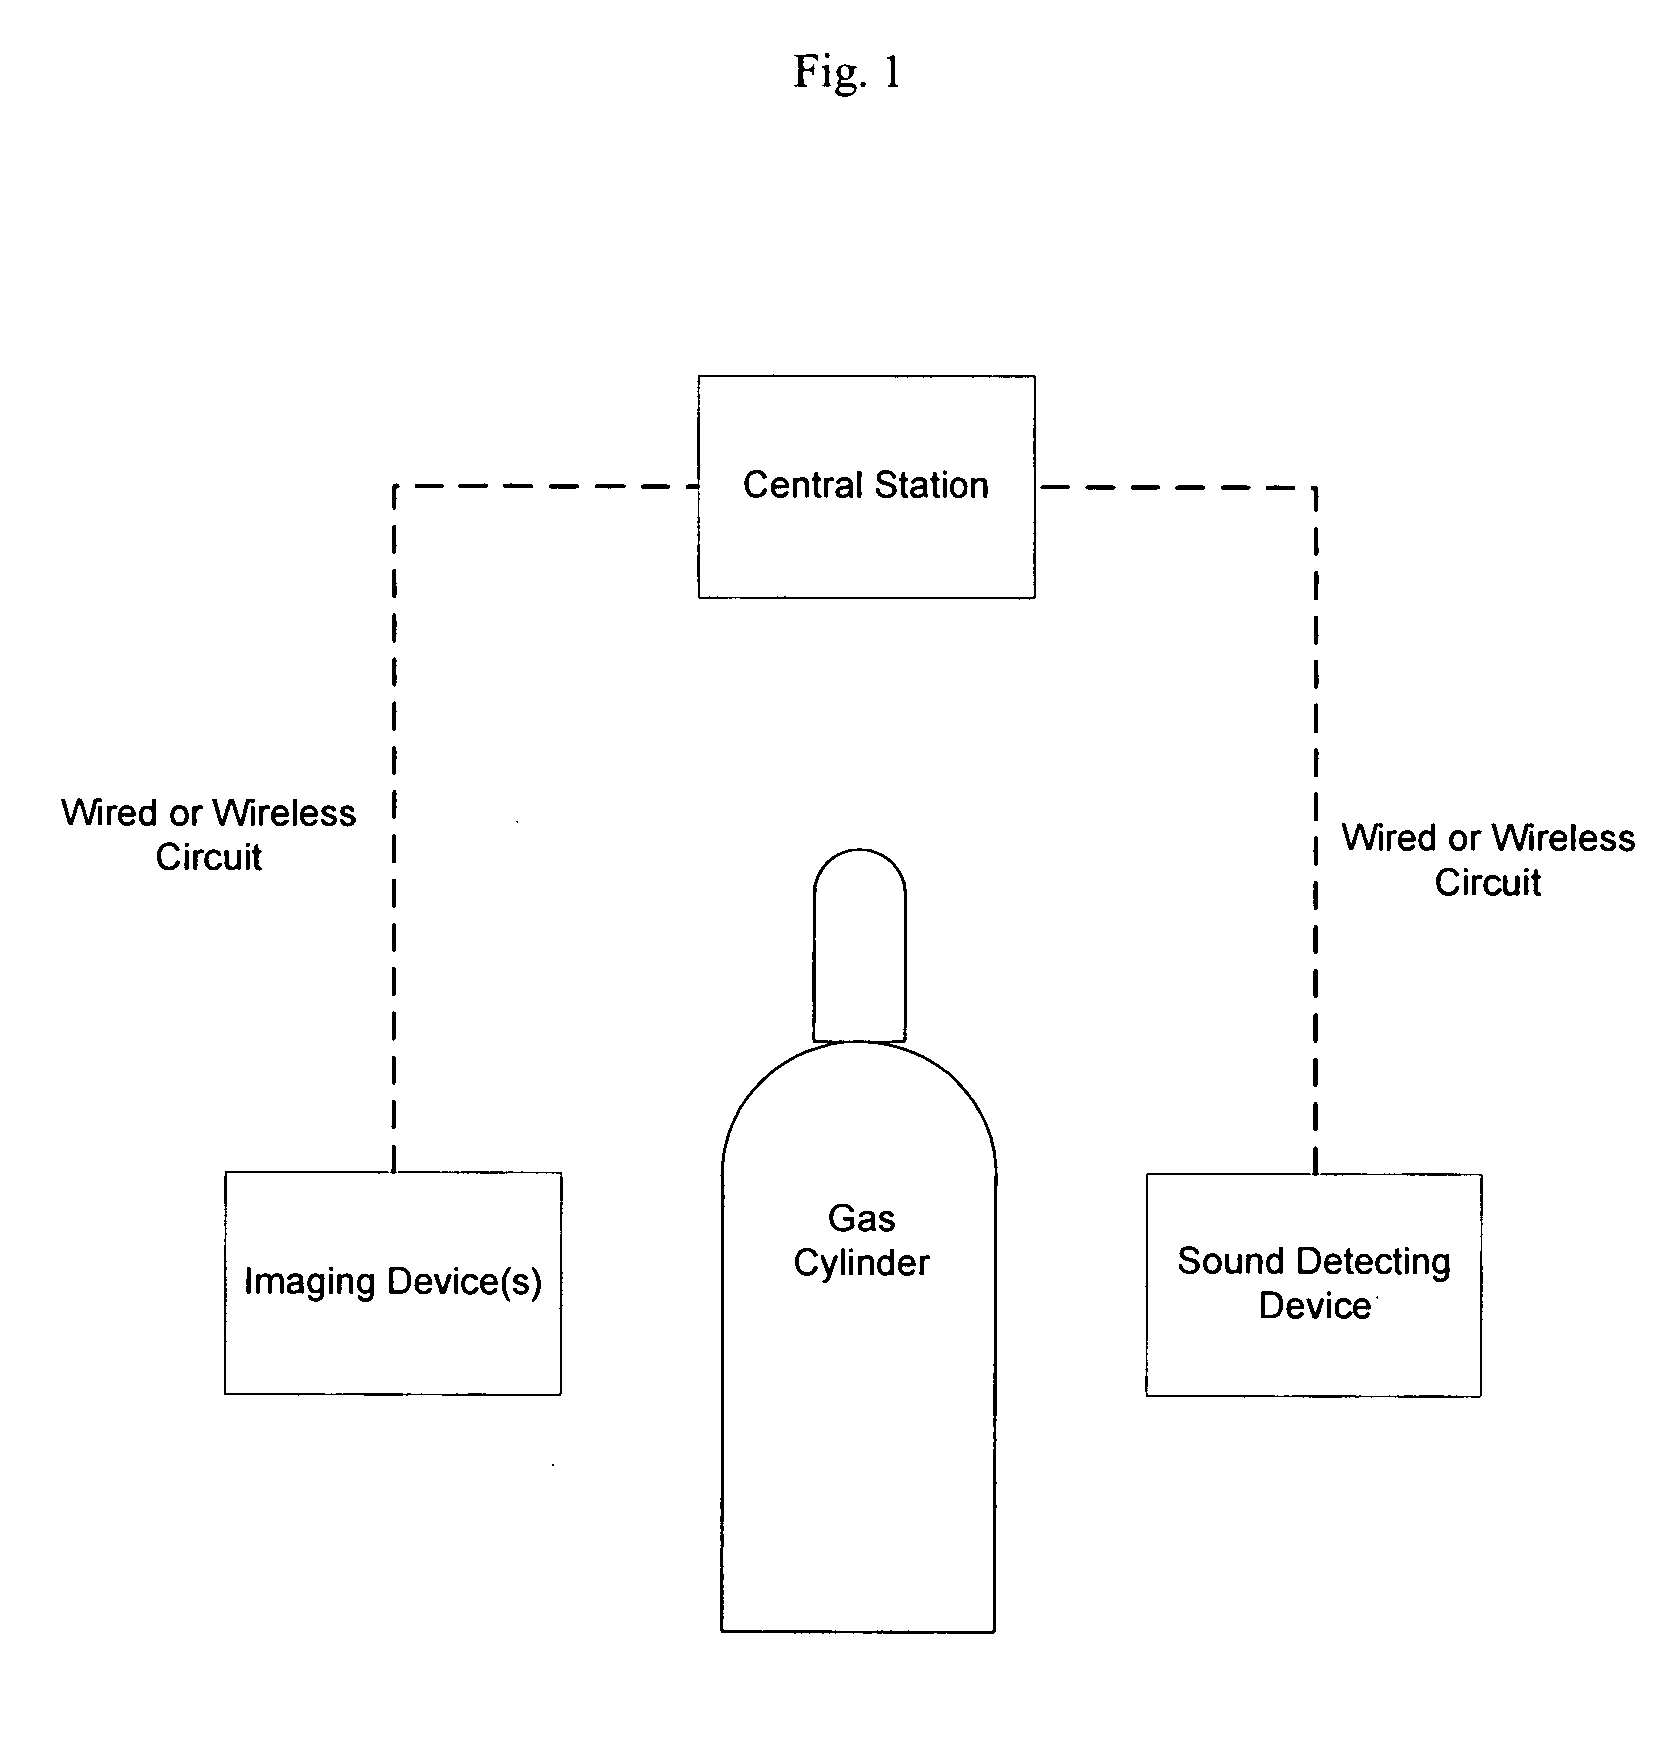 Apparatus and method for inspecting containers